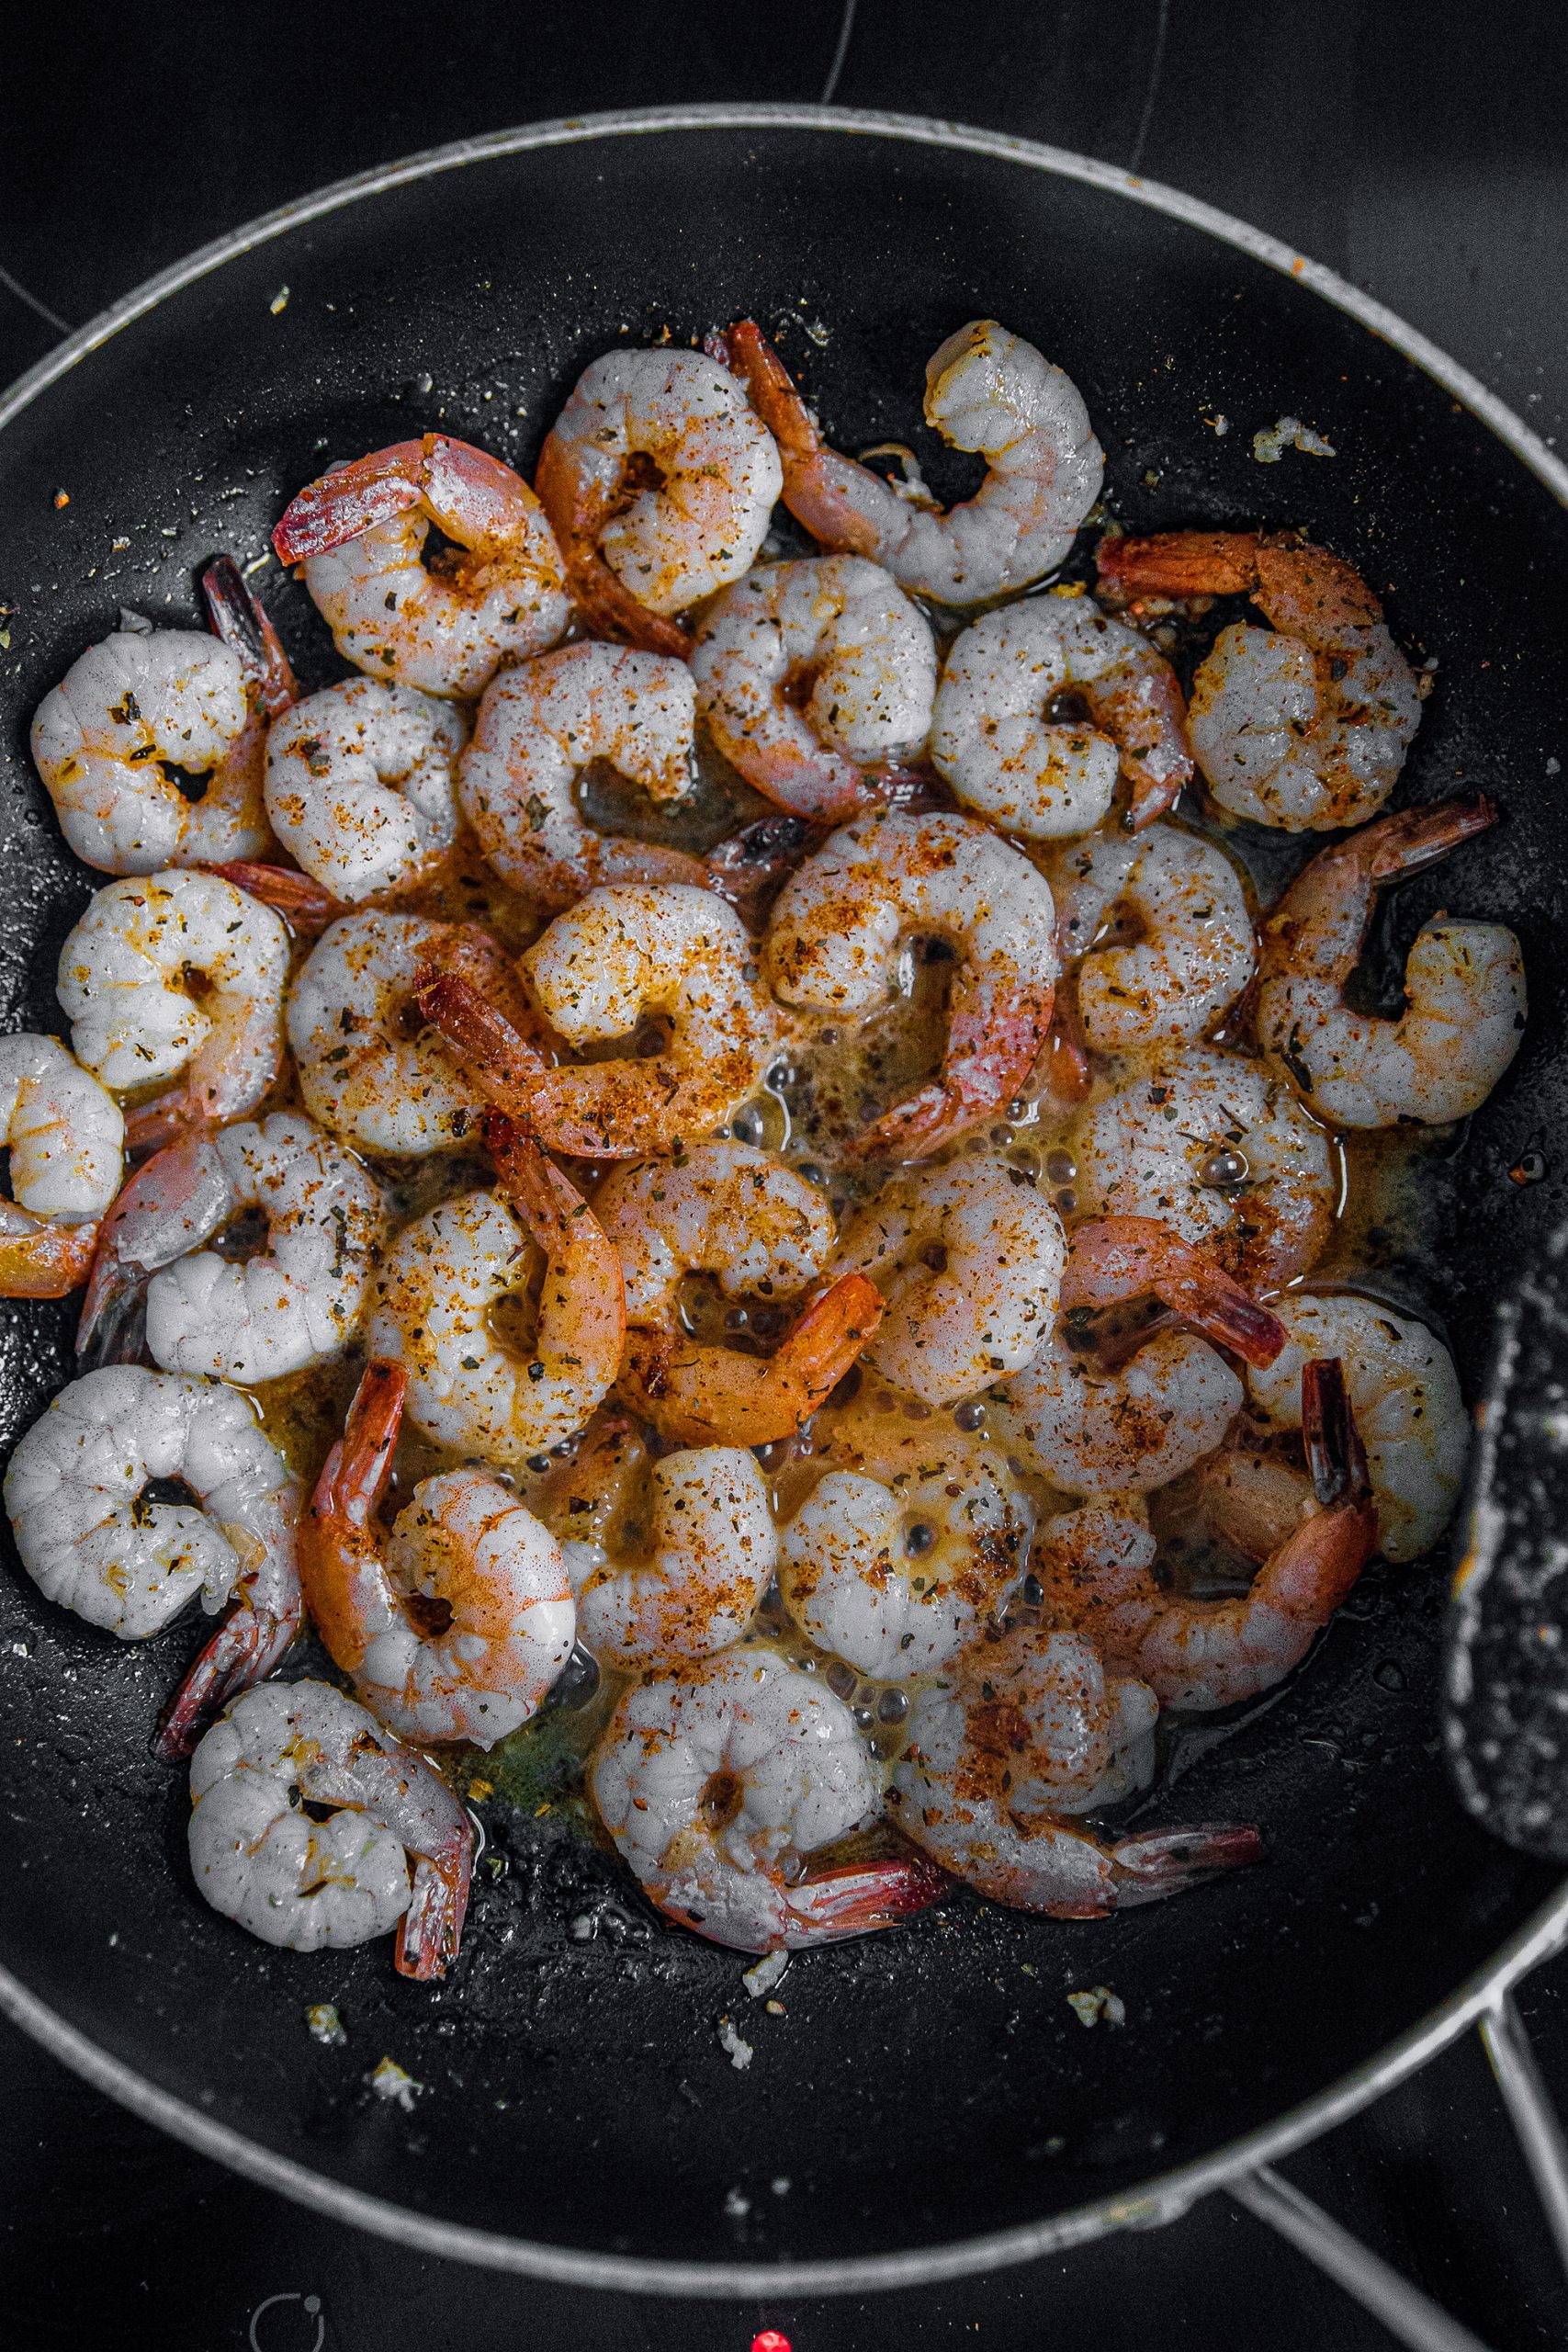 Add the shrimps